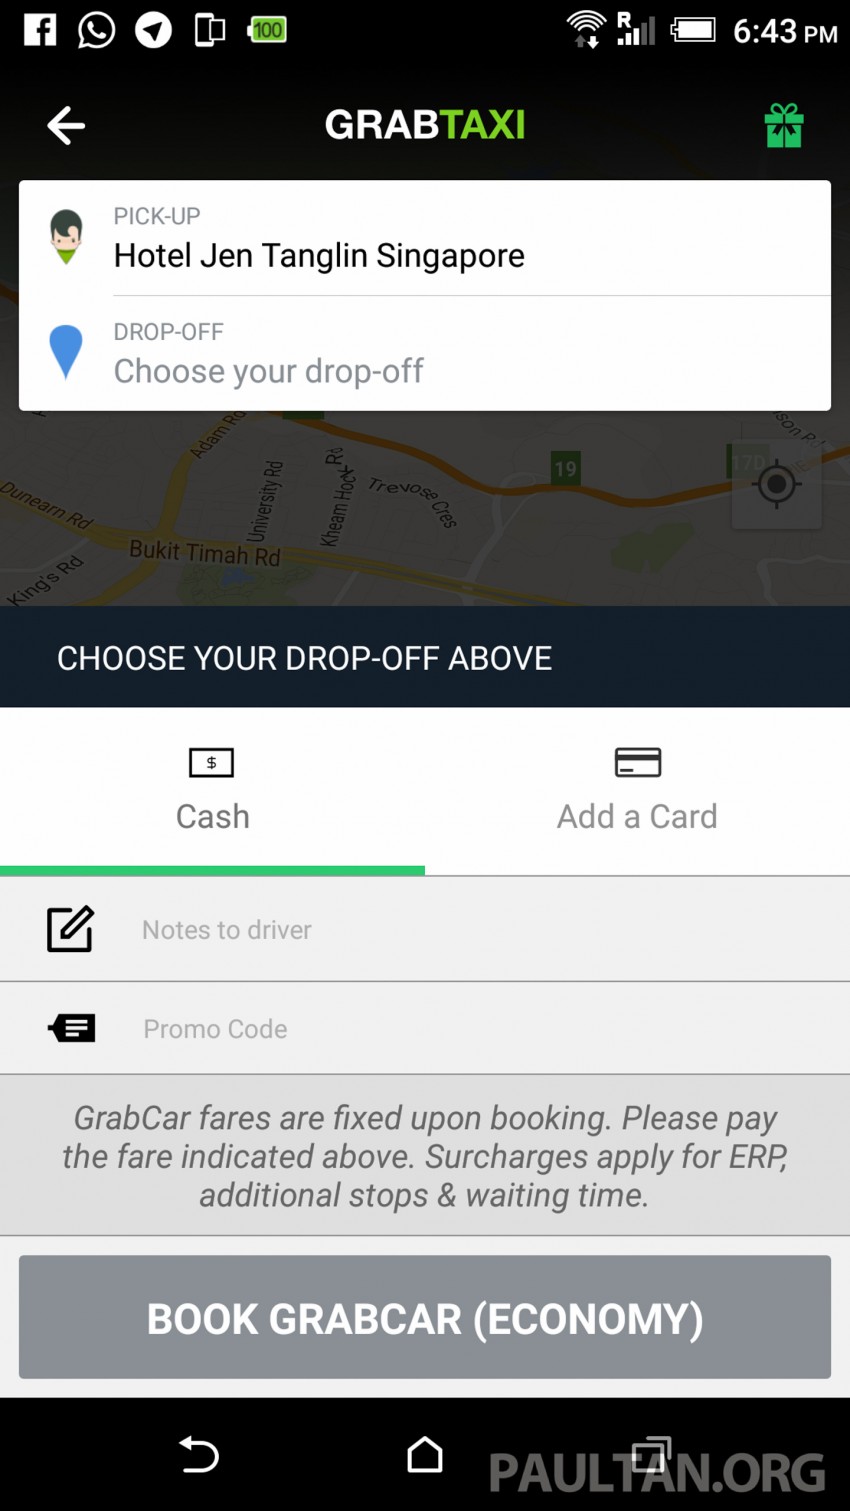 Grab rebrand introduces new app, with added features 435975